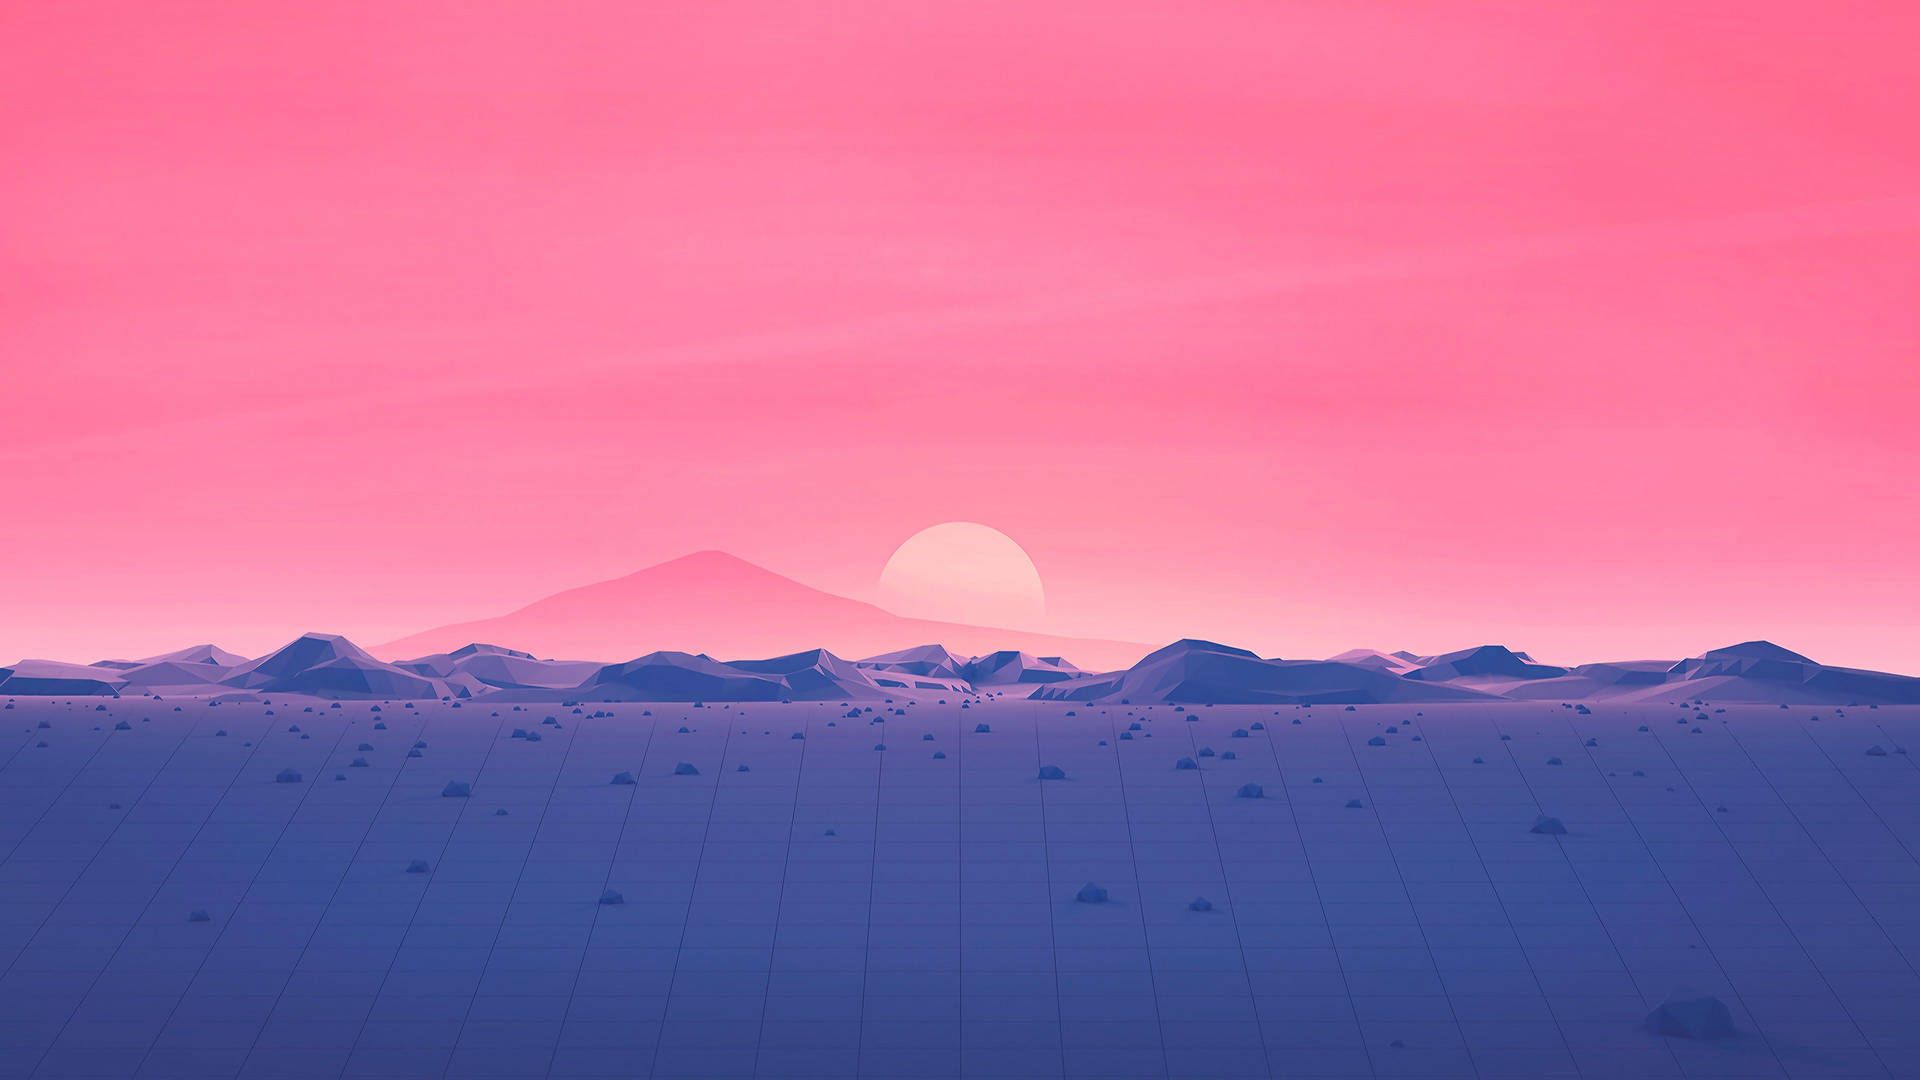 A pink sunset on the horizon with mountains in front - 1920x1080